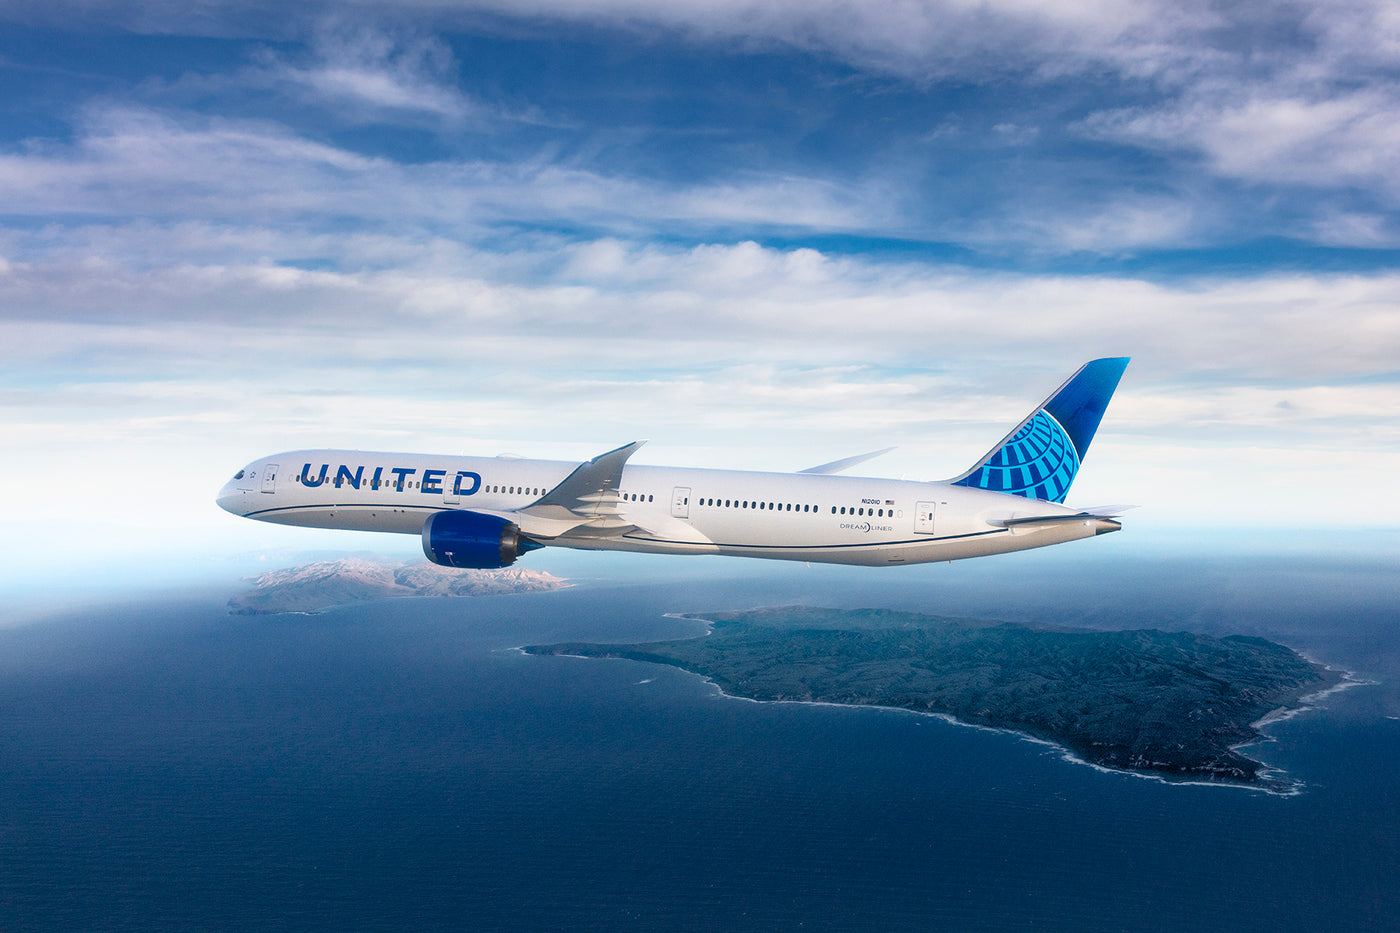 Hawaiian Host Now on Select United Airlines’ Flights